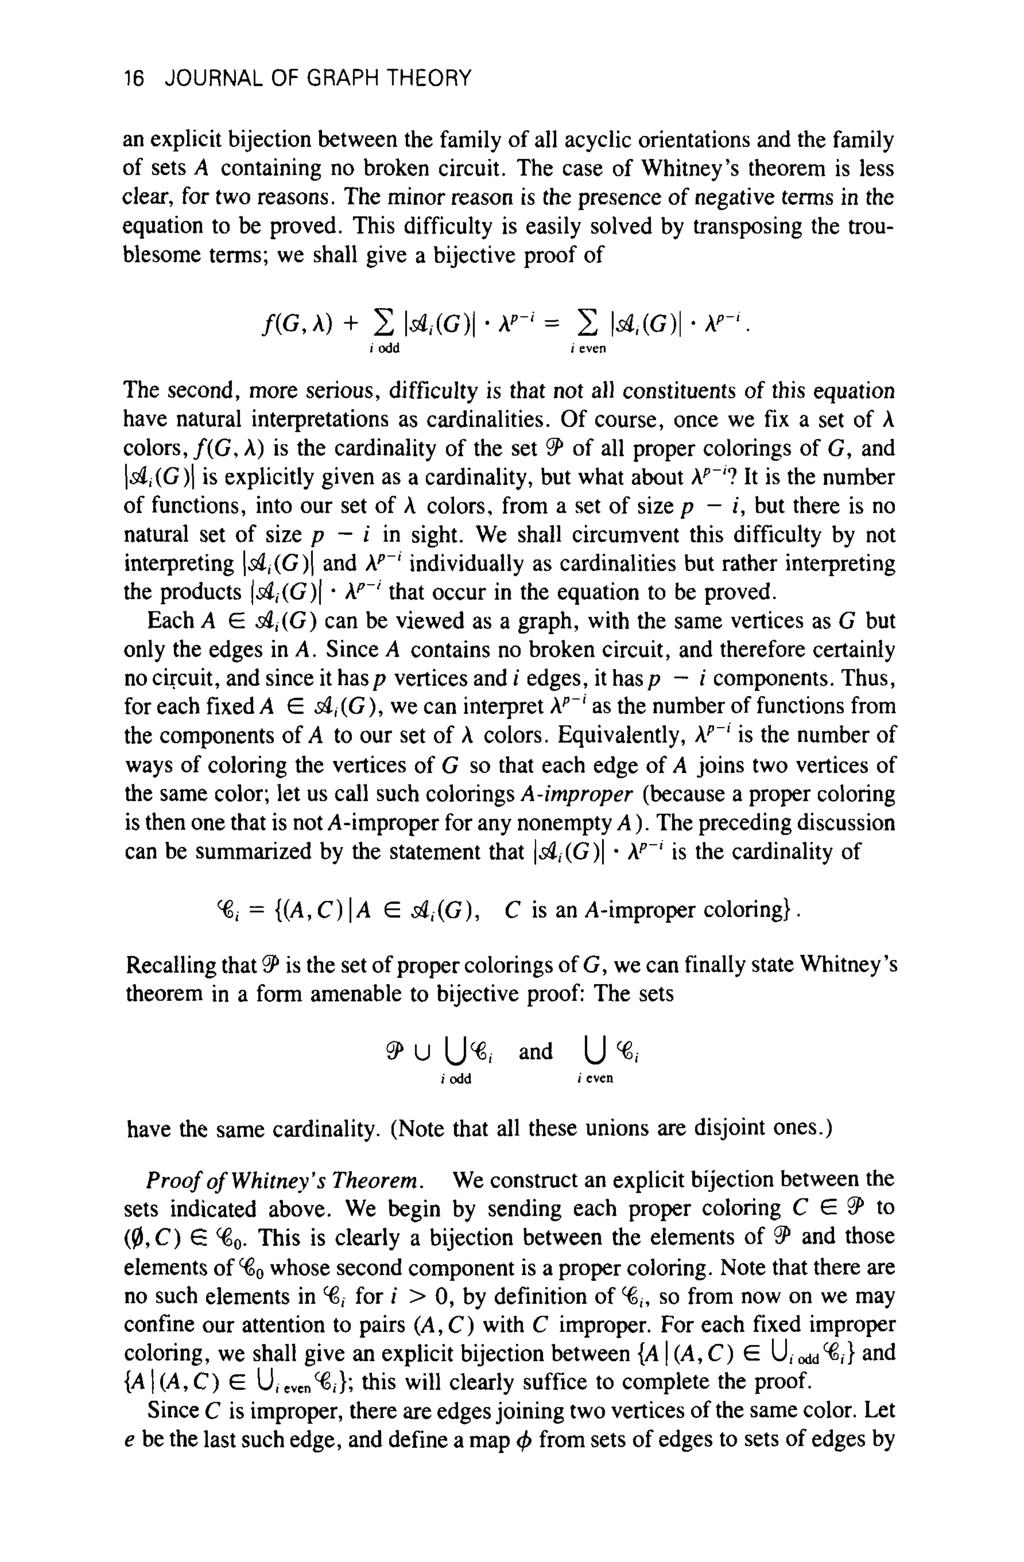 16 JOURNAL OF GRAPH THEORY an explicit bijection between the family of all acyclic orientations and the family of sets A containing no broken circuit.